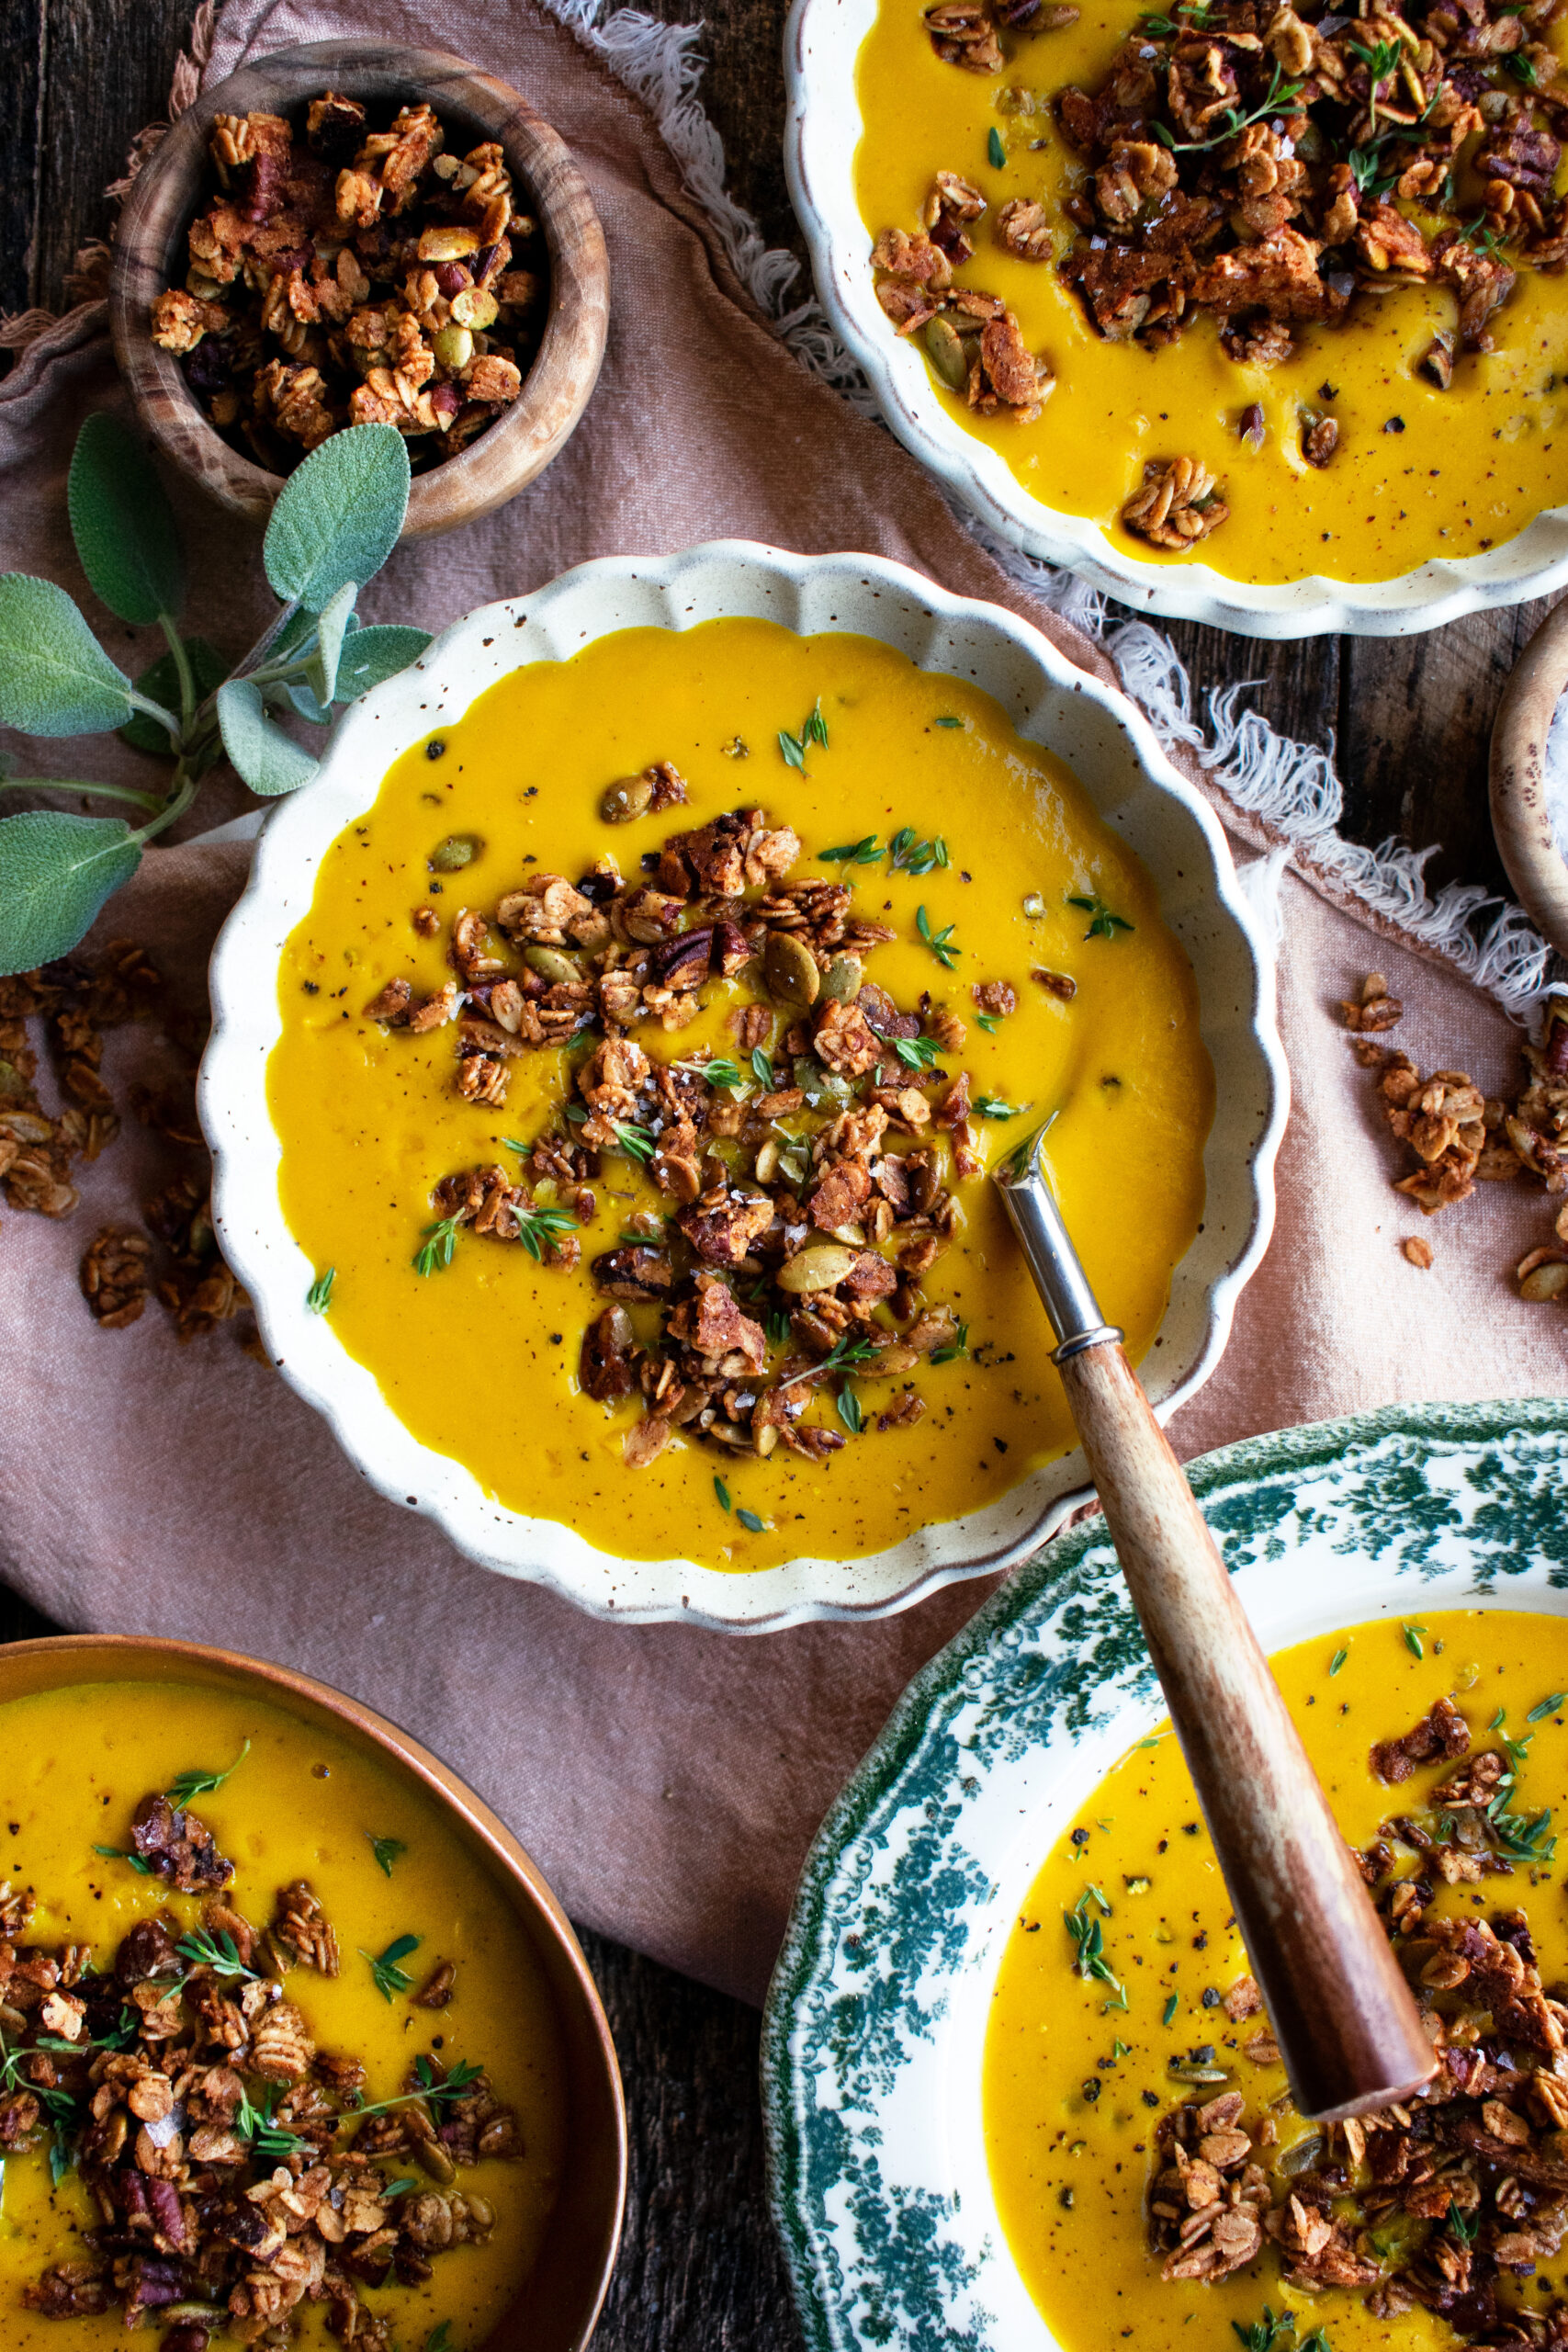 Culinary Creations: Sweet and spicy pumpkin soup